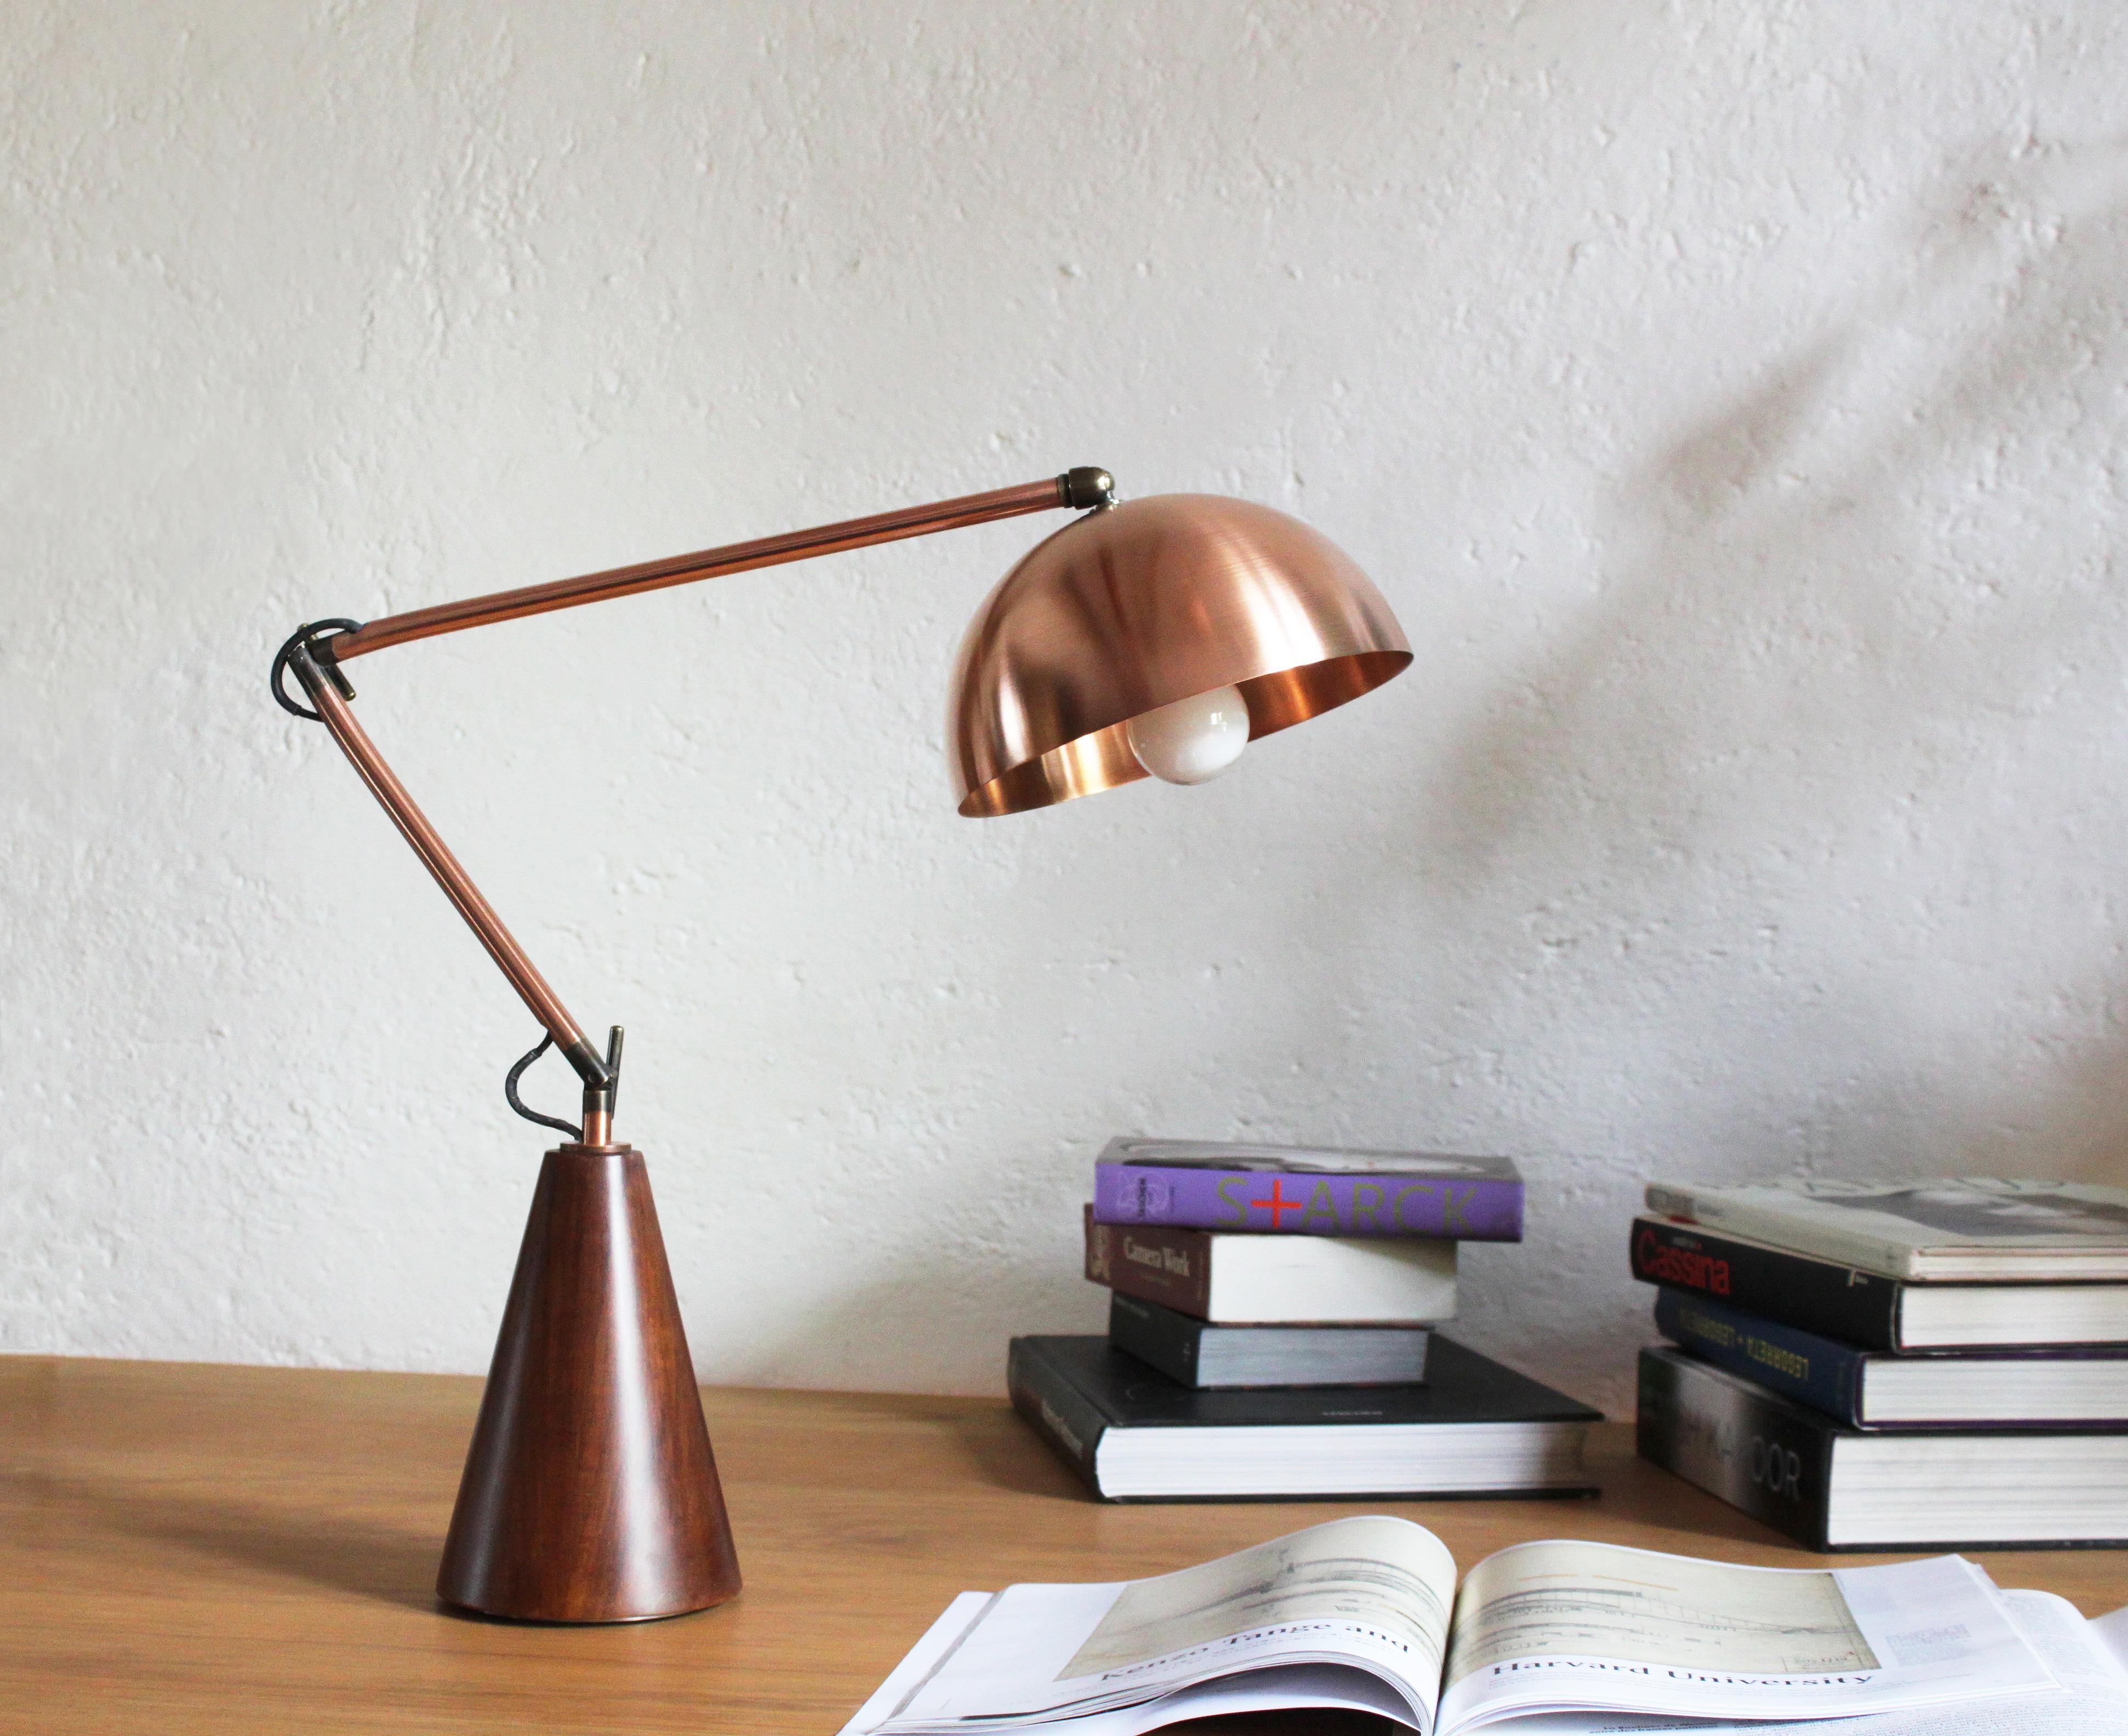 Codos De Mesa lamp is made of satin copper, solid steel, and Tzalam wood.

Full dimensions:
H 51cm x W 48cm
Volcano base: 20 x 60 x 50 cm
Dome: ø 20 x H 10 cm

Please contact the gallery, Tuleste Factory, for customizable options. The lead time for